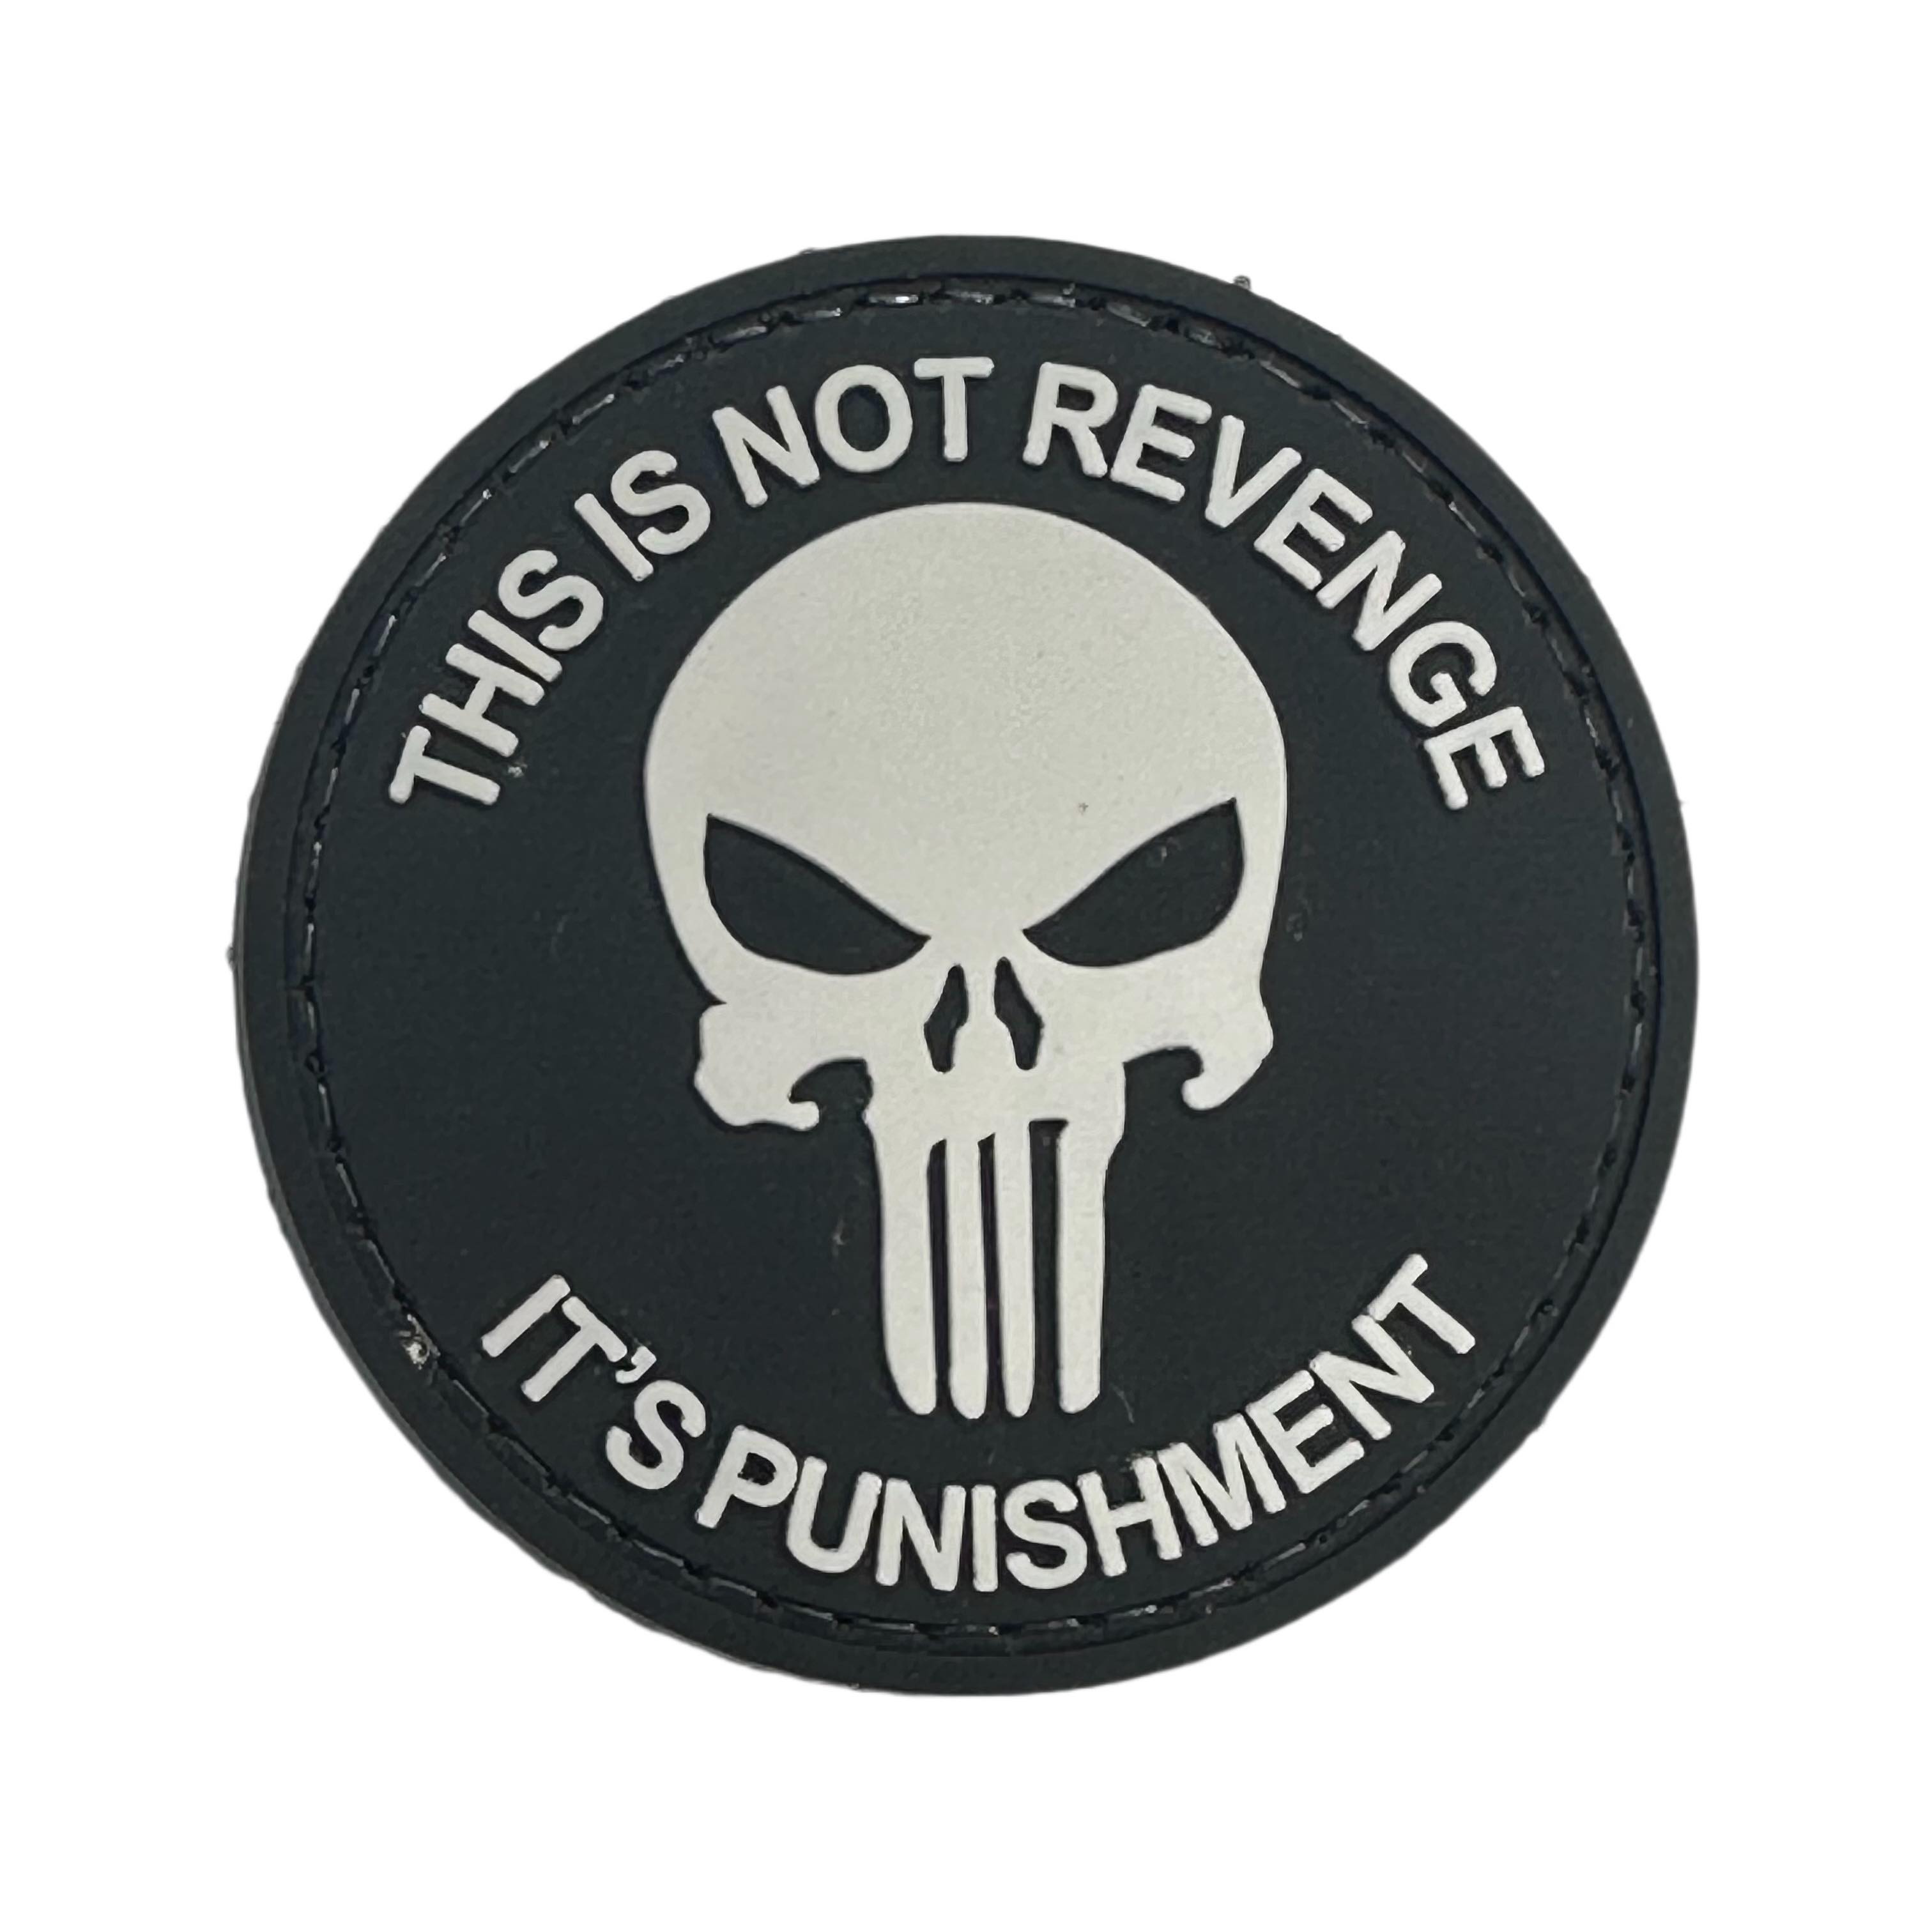 Rubber Patch - This is not Revenge it's punishment